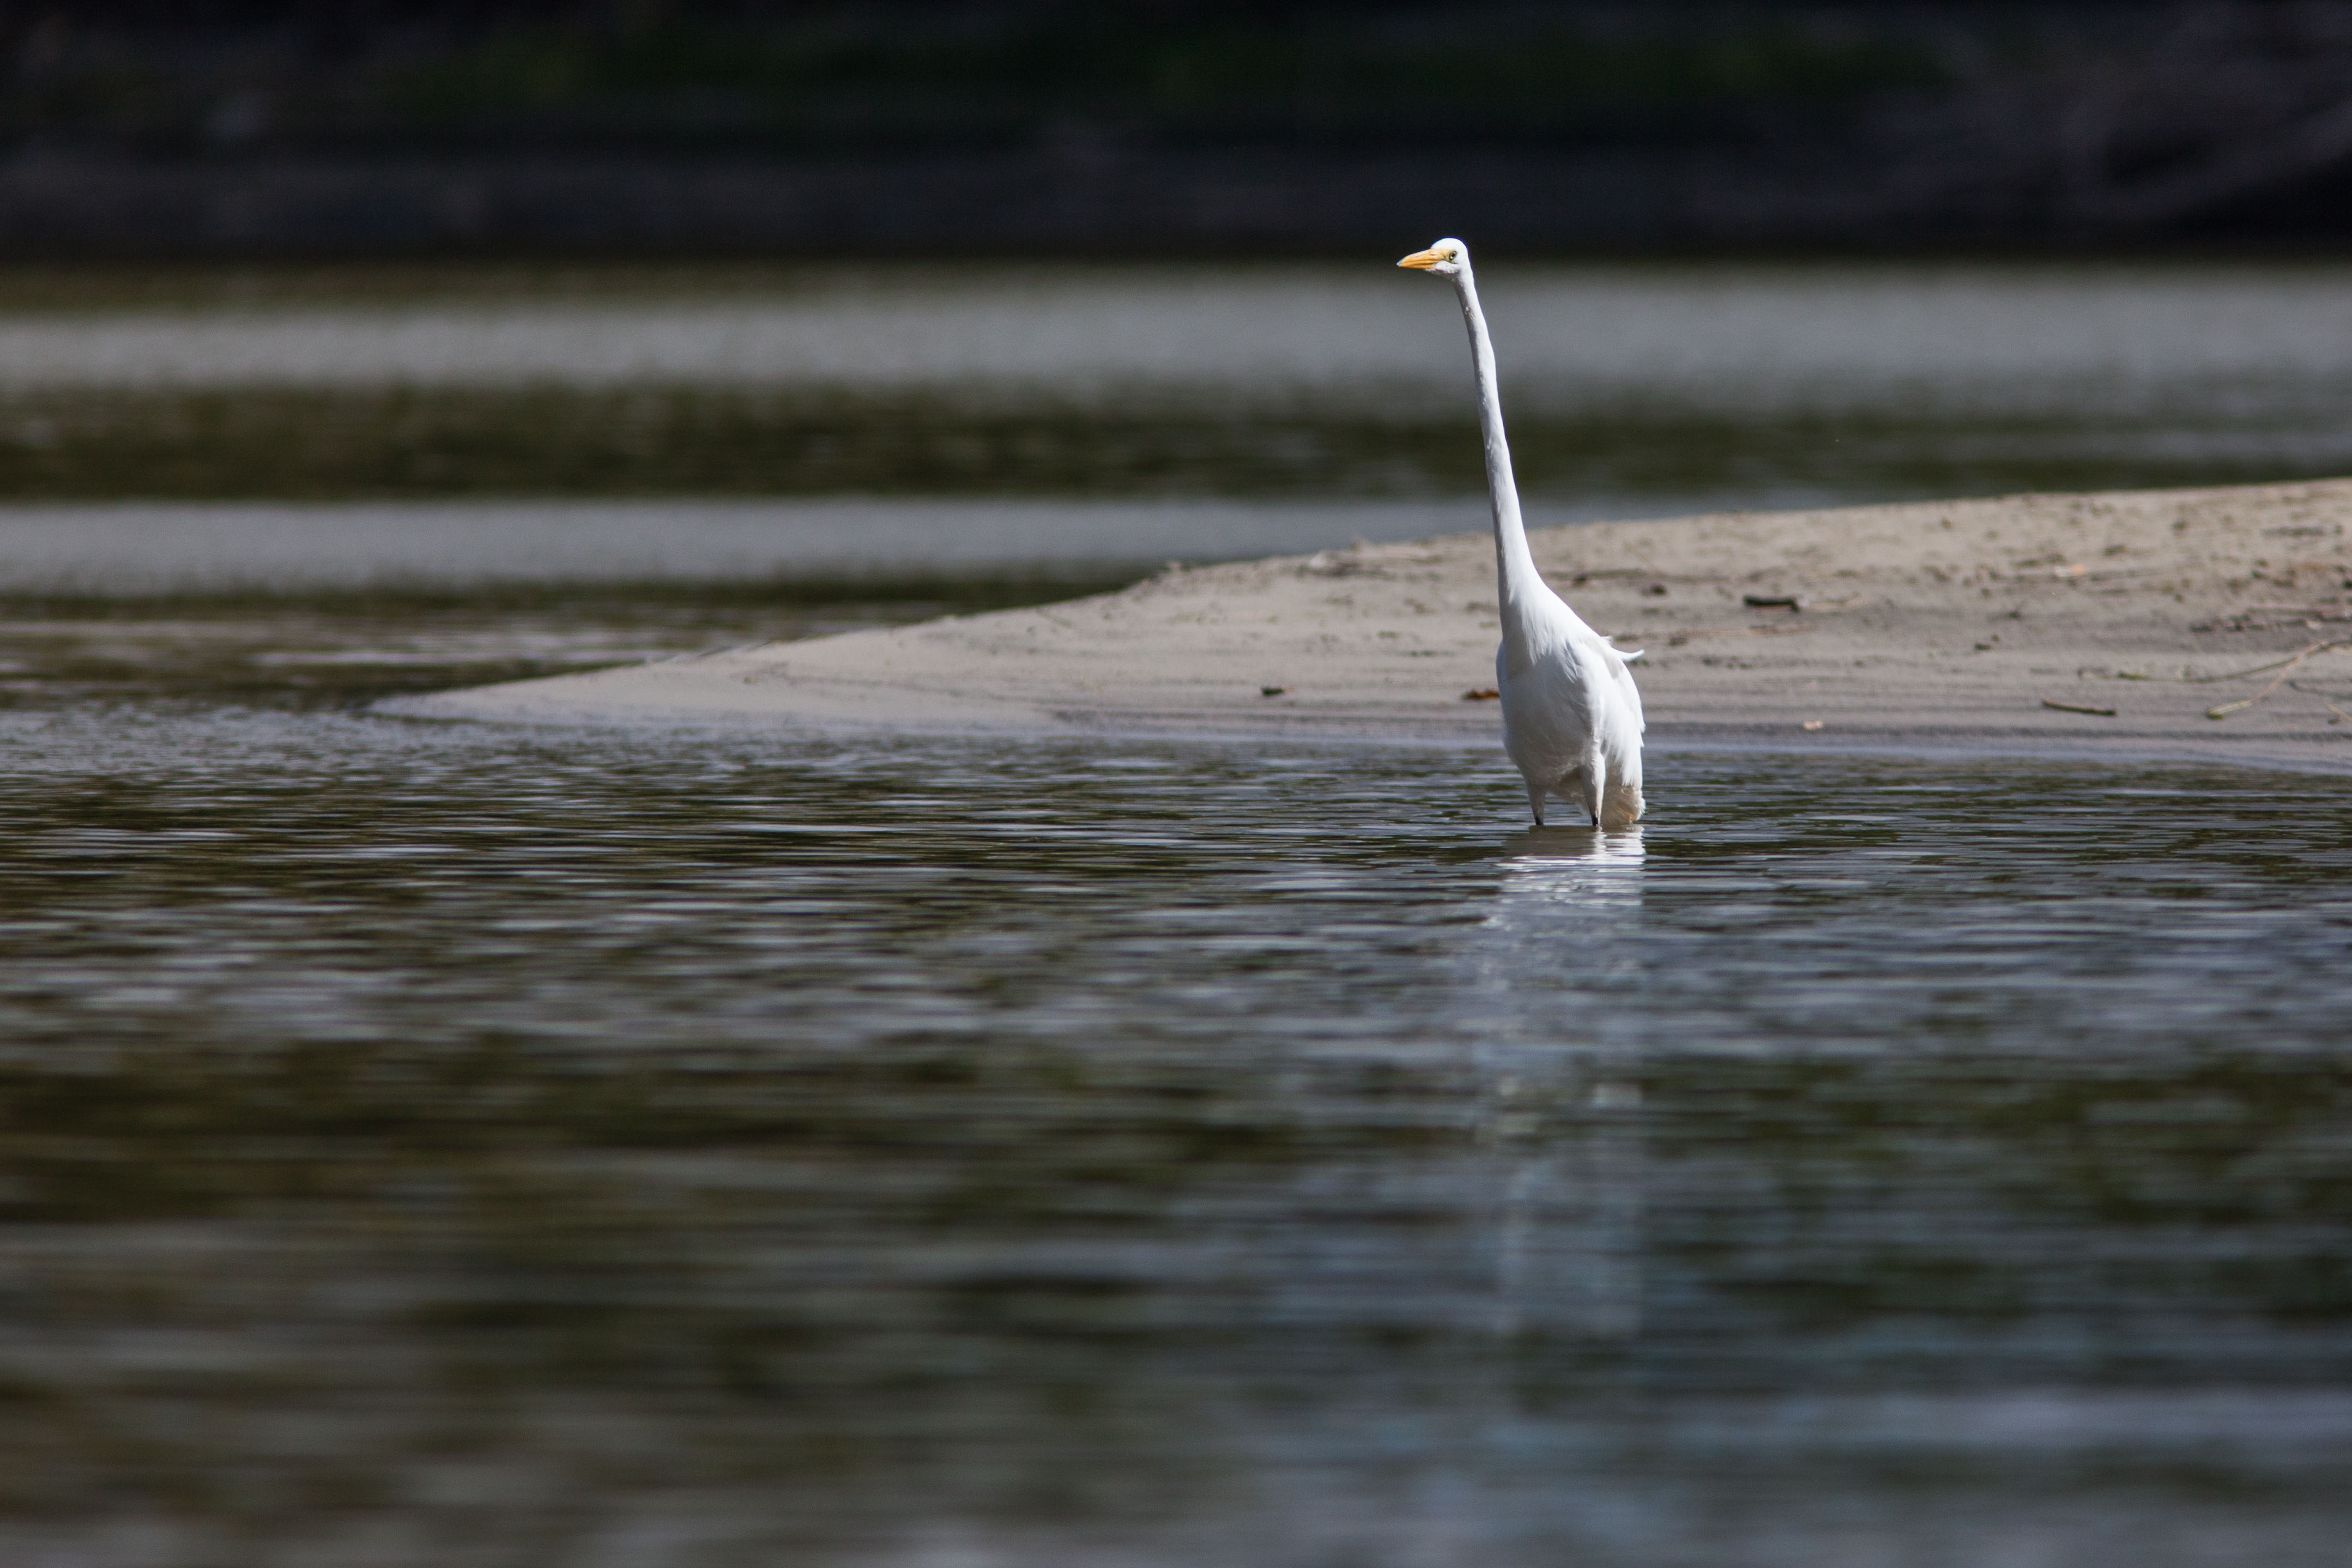 A large, long-necked, long-legged bird wades in the river.